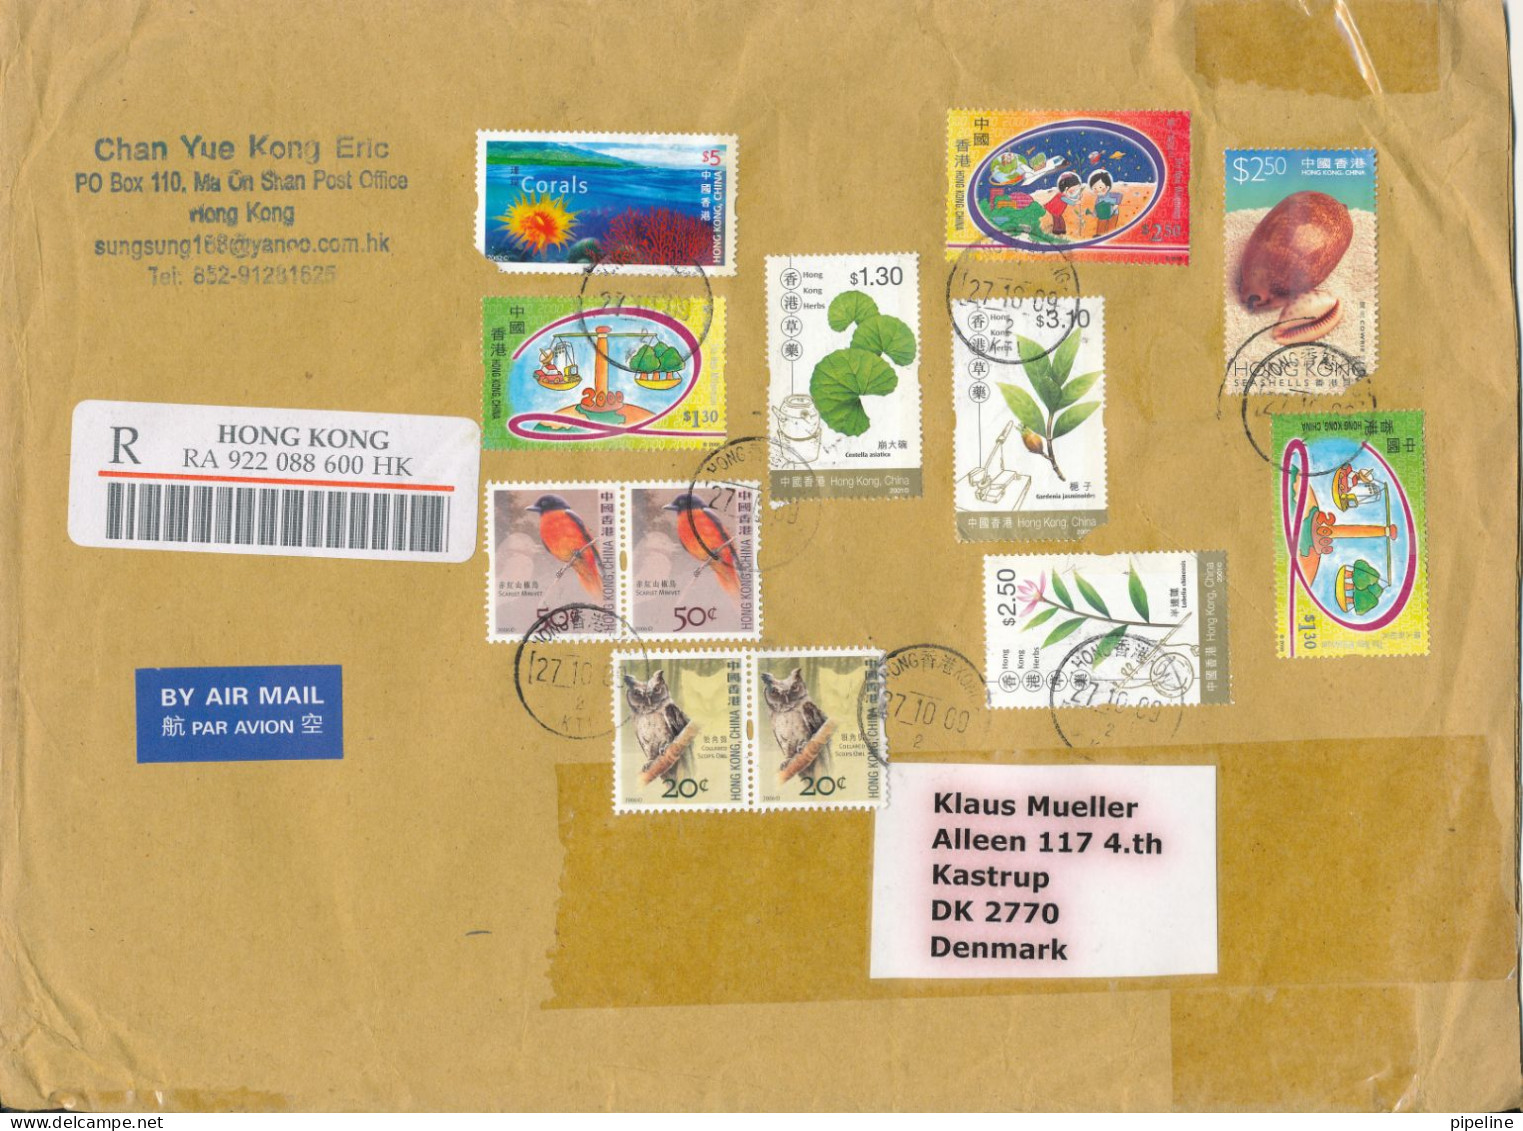 Hong Kong Registered Cover Sent Air Mail To Denmark 27-10-2009 Topic Stamps Big Size Cover 2 Stamps Are Damaged - Storia Postale